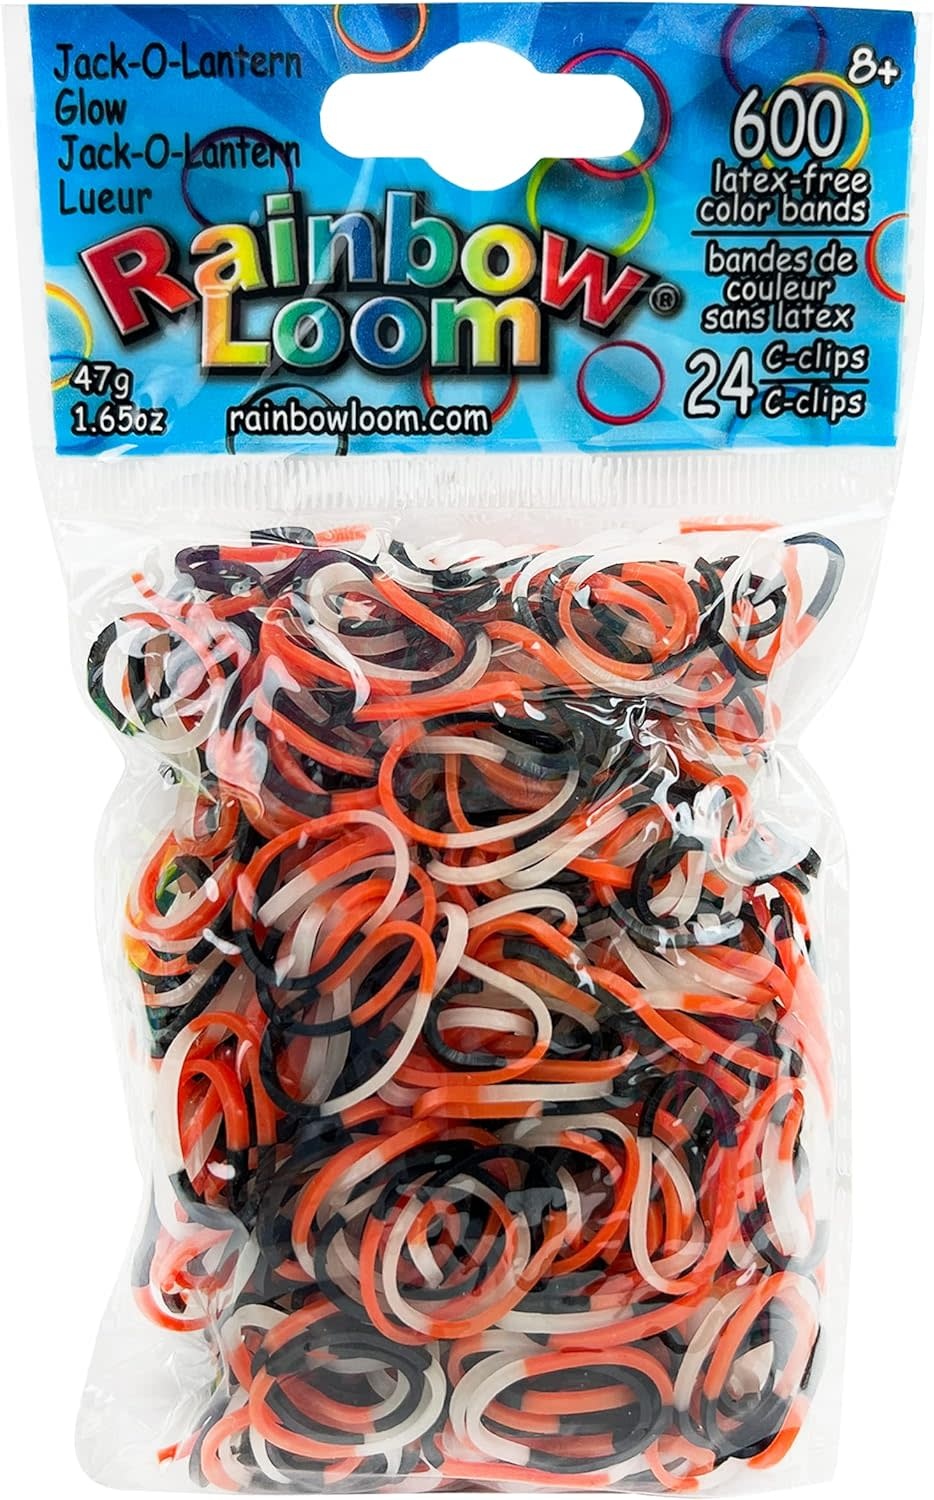 Rainbow Loom Refill Bands: Spooky Jack-O-Lantern - Wit & Whimsy Toys